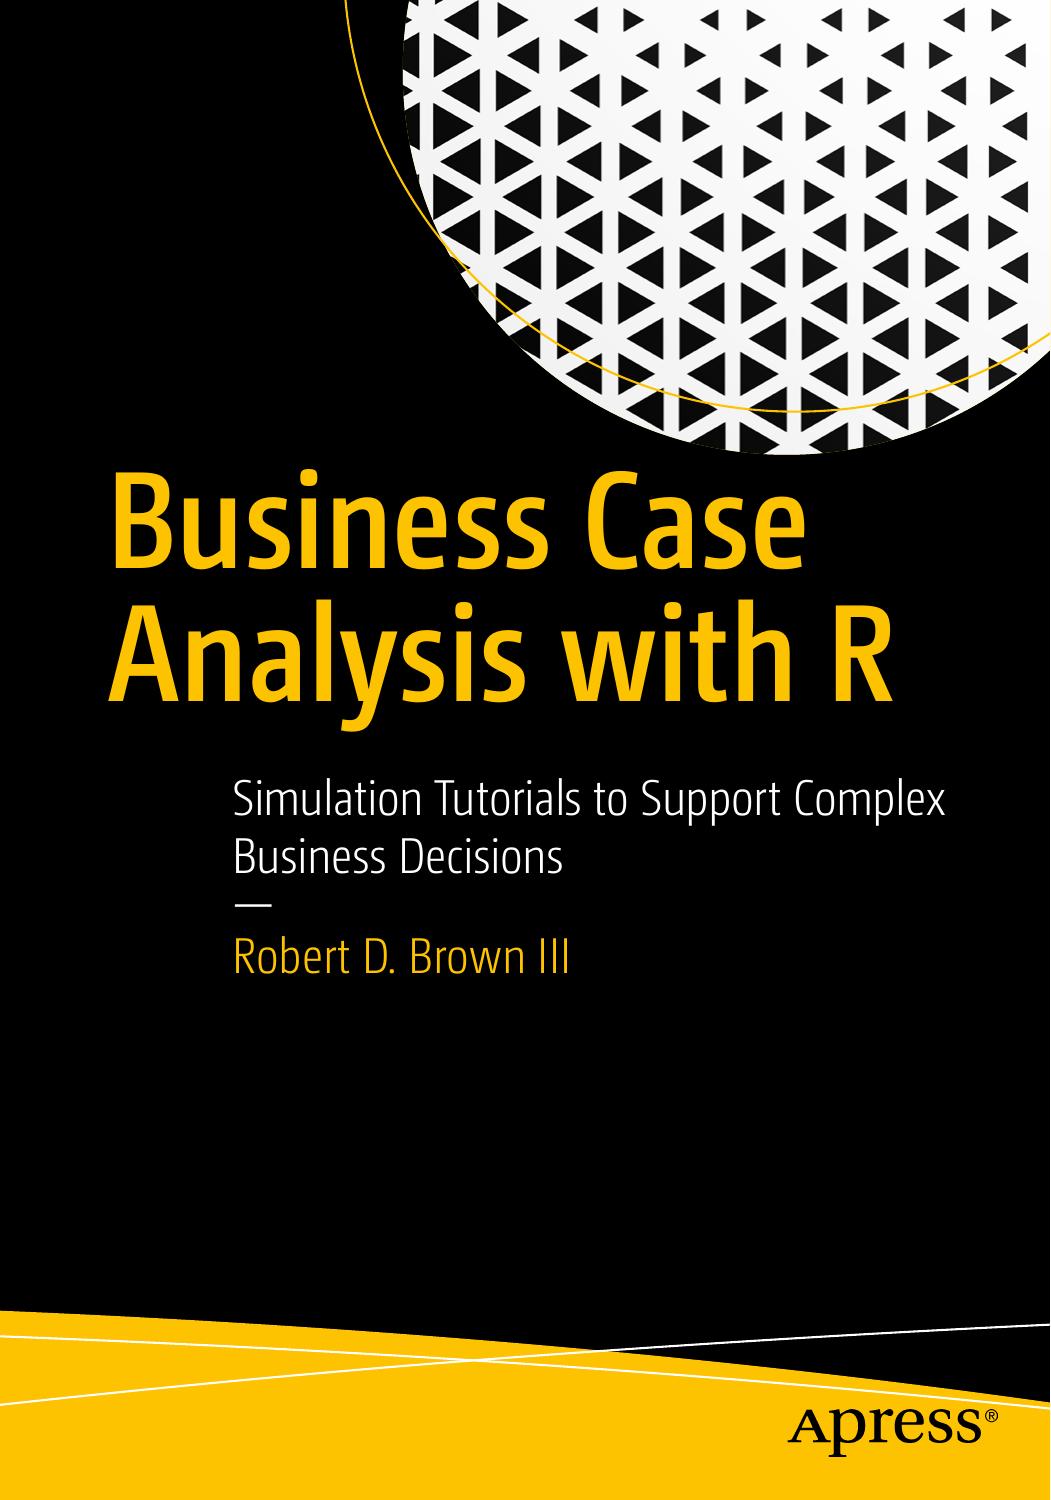 Business Case Analysis with R Simulation Tutorials to Support Complex Business Decisions ( PDFDrive ) 2018